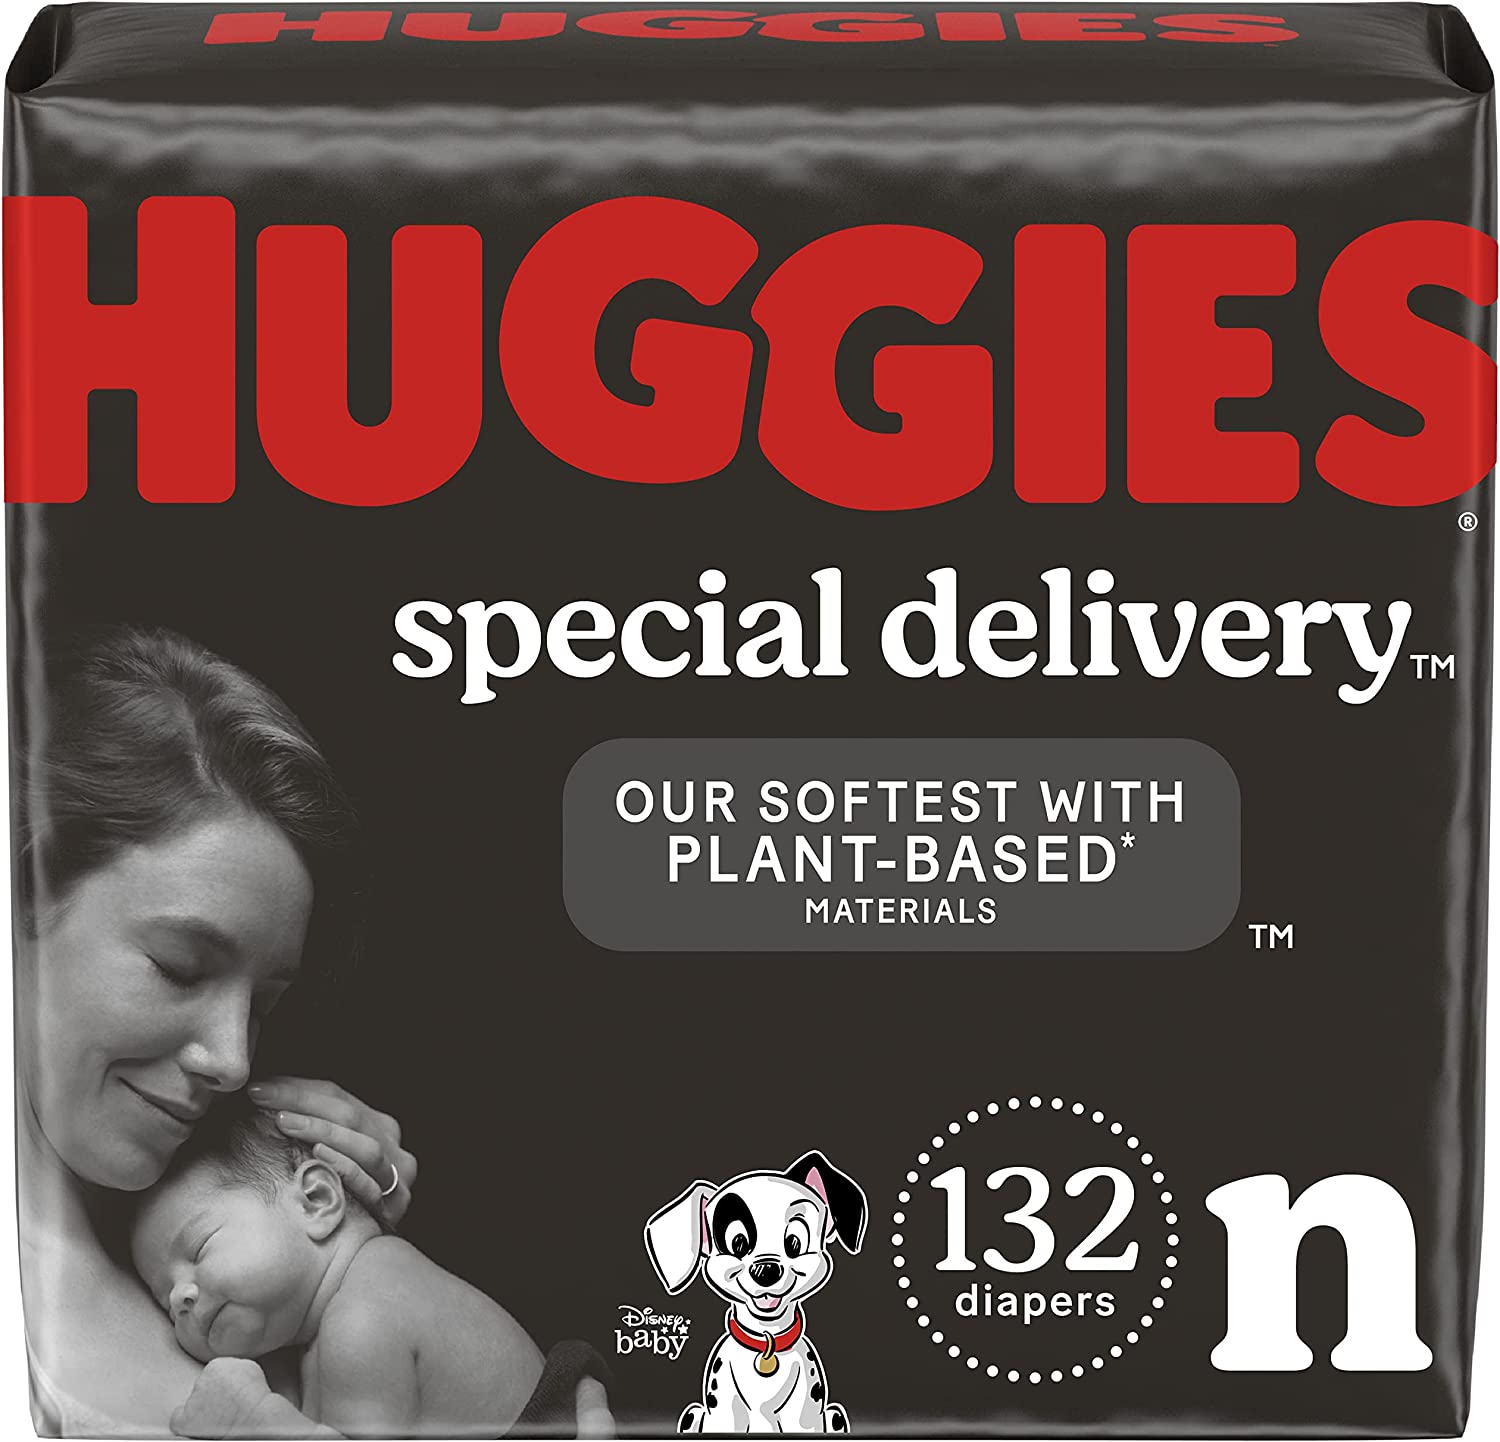 Hypoallergenic Baby Diapers Size Newborn (up to 10 lbs), Huggies Special Delivery, Fragrance Free, Safe for Sensitive Skin, 132 Ct